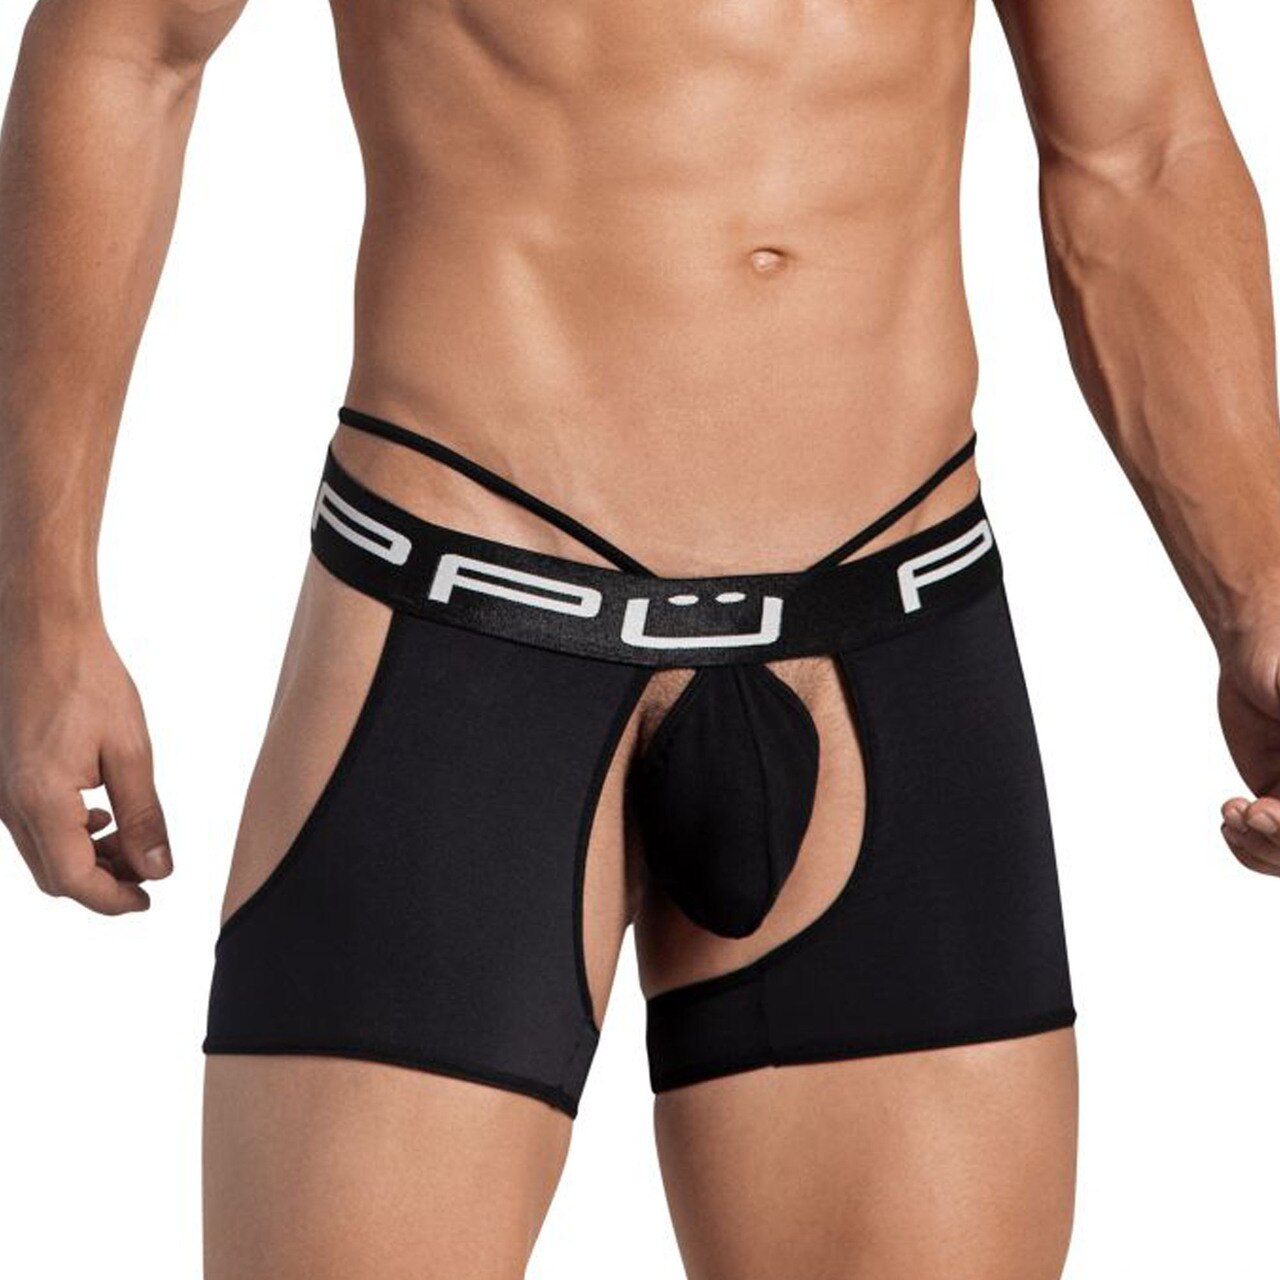 Mens PPU Underwear Open Front & Back Shorts with G string Black